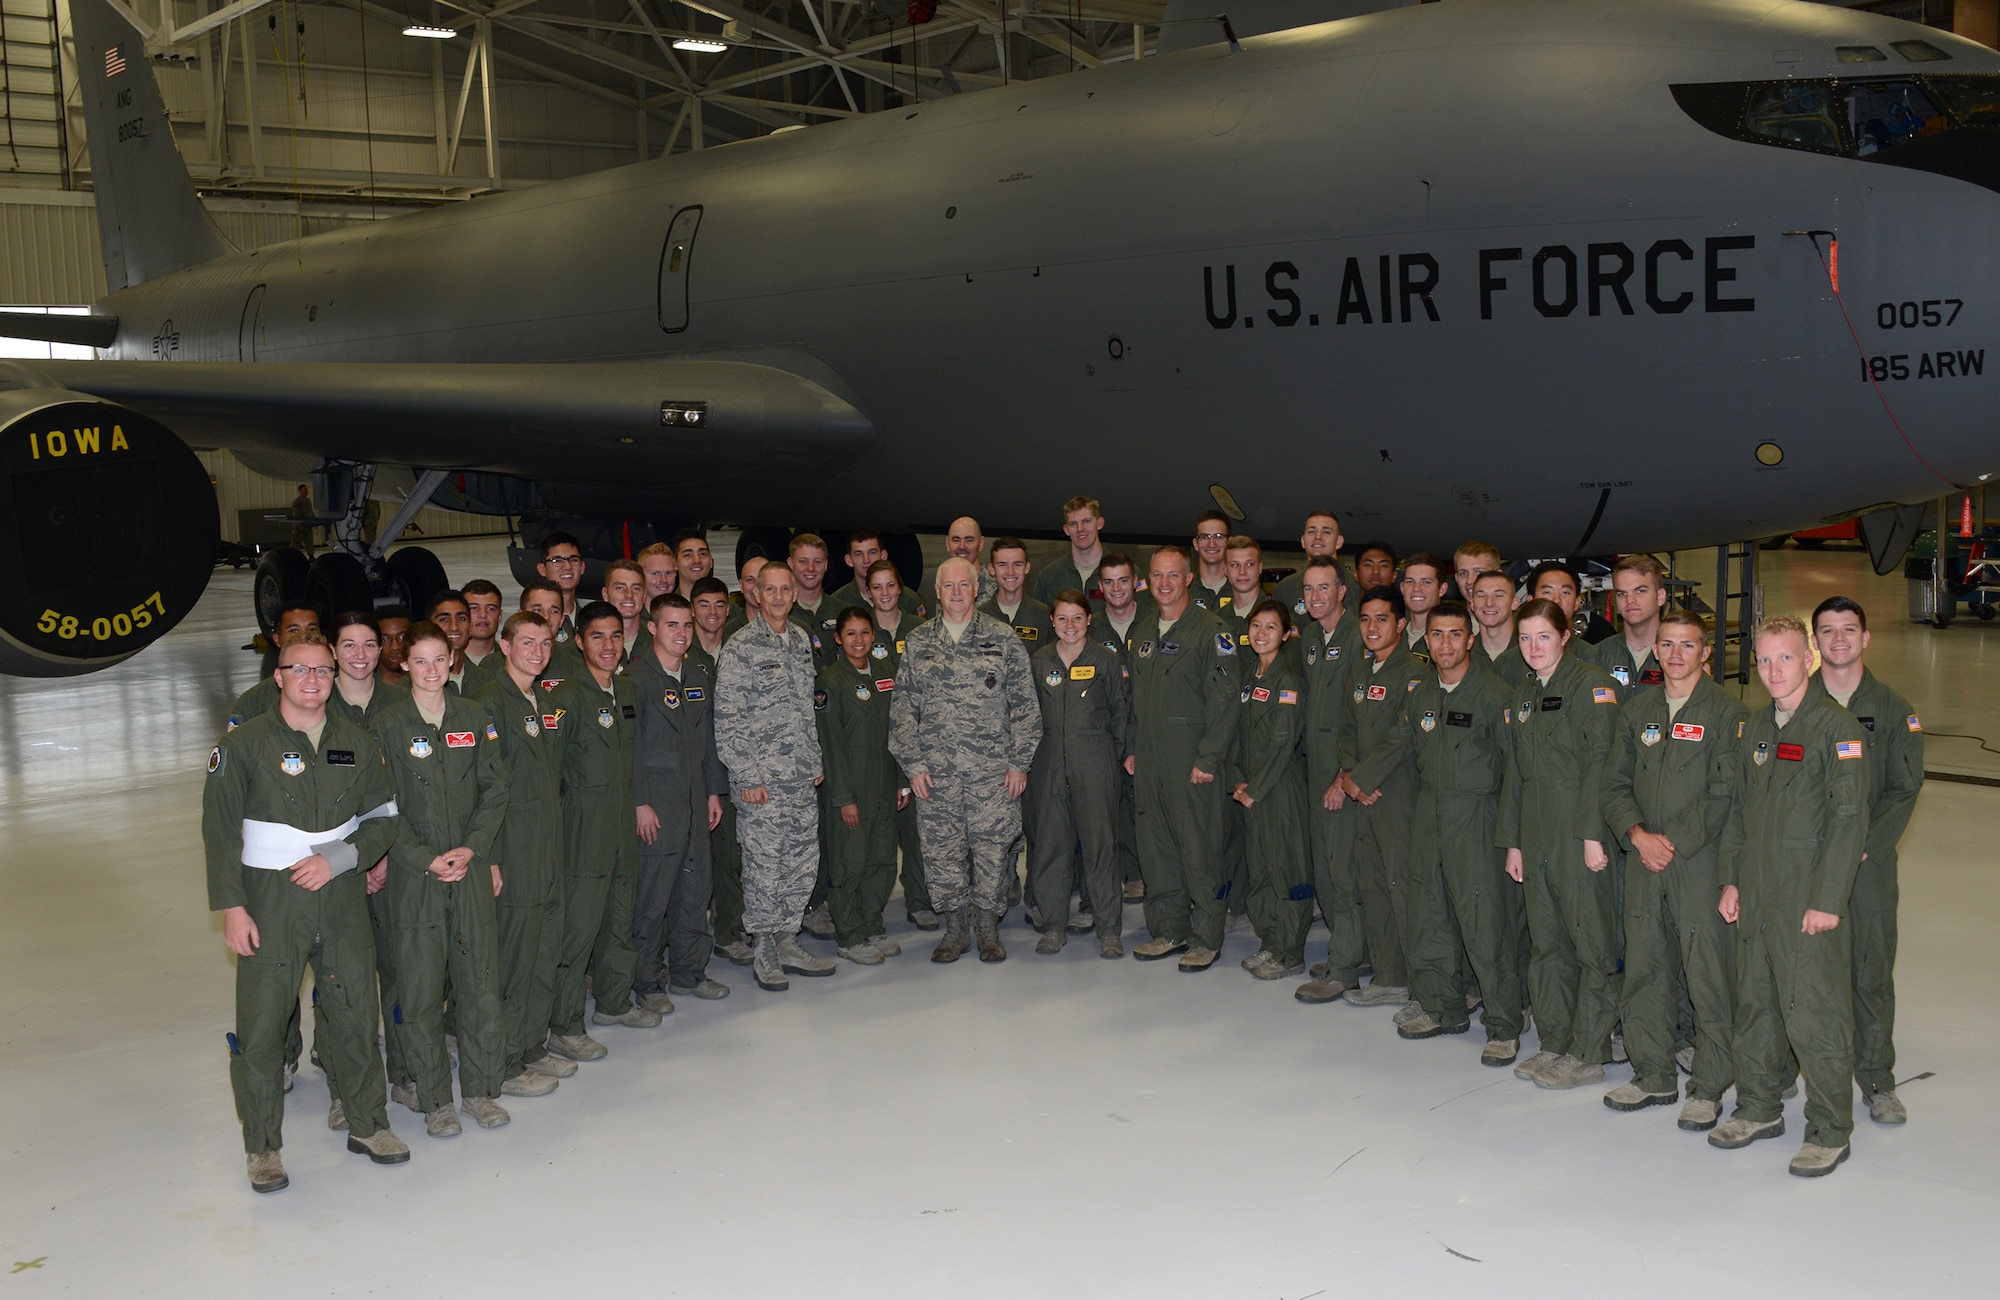 40 Cadets from the United States Air Force Academy in Colorado Springs, Colo. stand with the Director of the Air National Guard, Lt. Gen. Scott Rice (center) in front of a U.S. Air Force Startotanker assigned to the 185th Air Refueling Wing, Iowa Air National Guard, in Sioux City, Iowa on November 5, 2016.
U.S. Air National Guard Photo by: Master Sgt. Vincent De Groot 